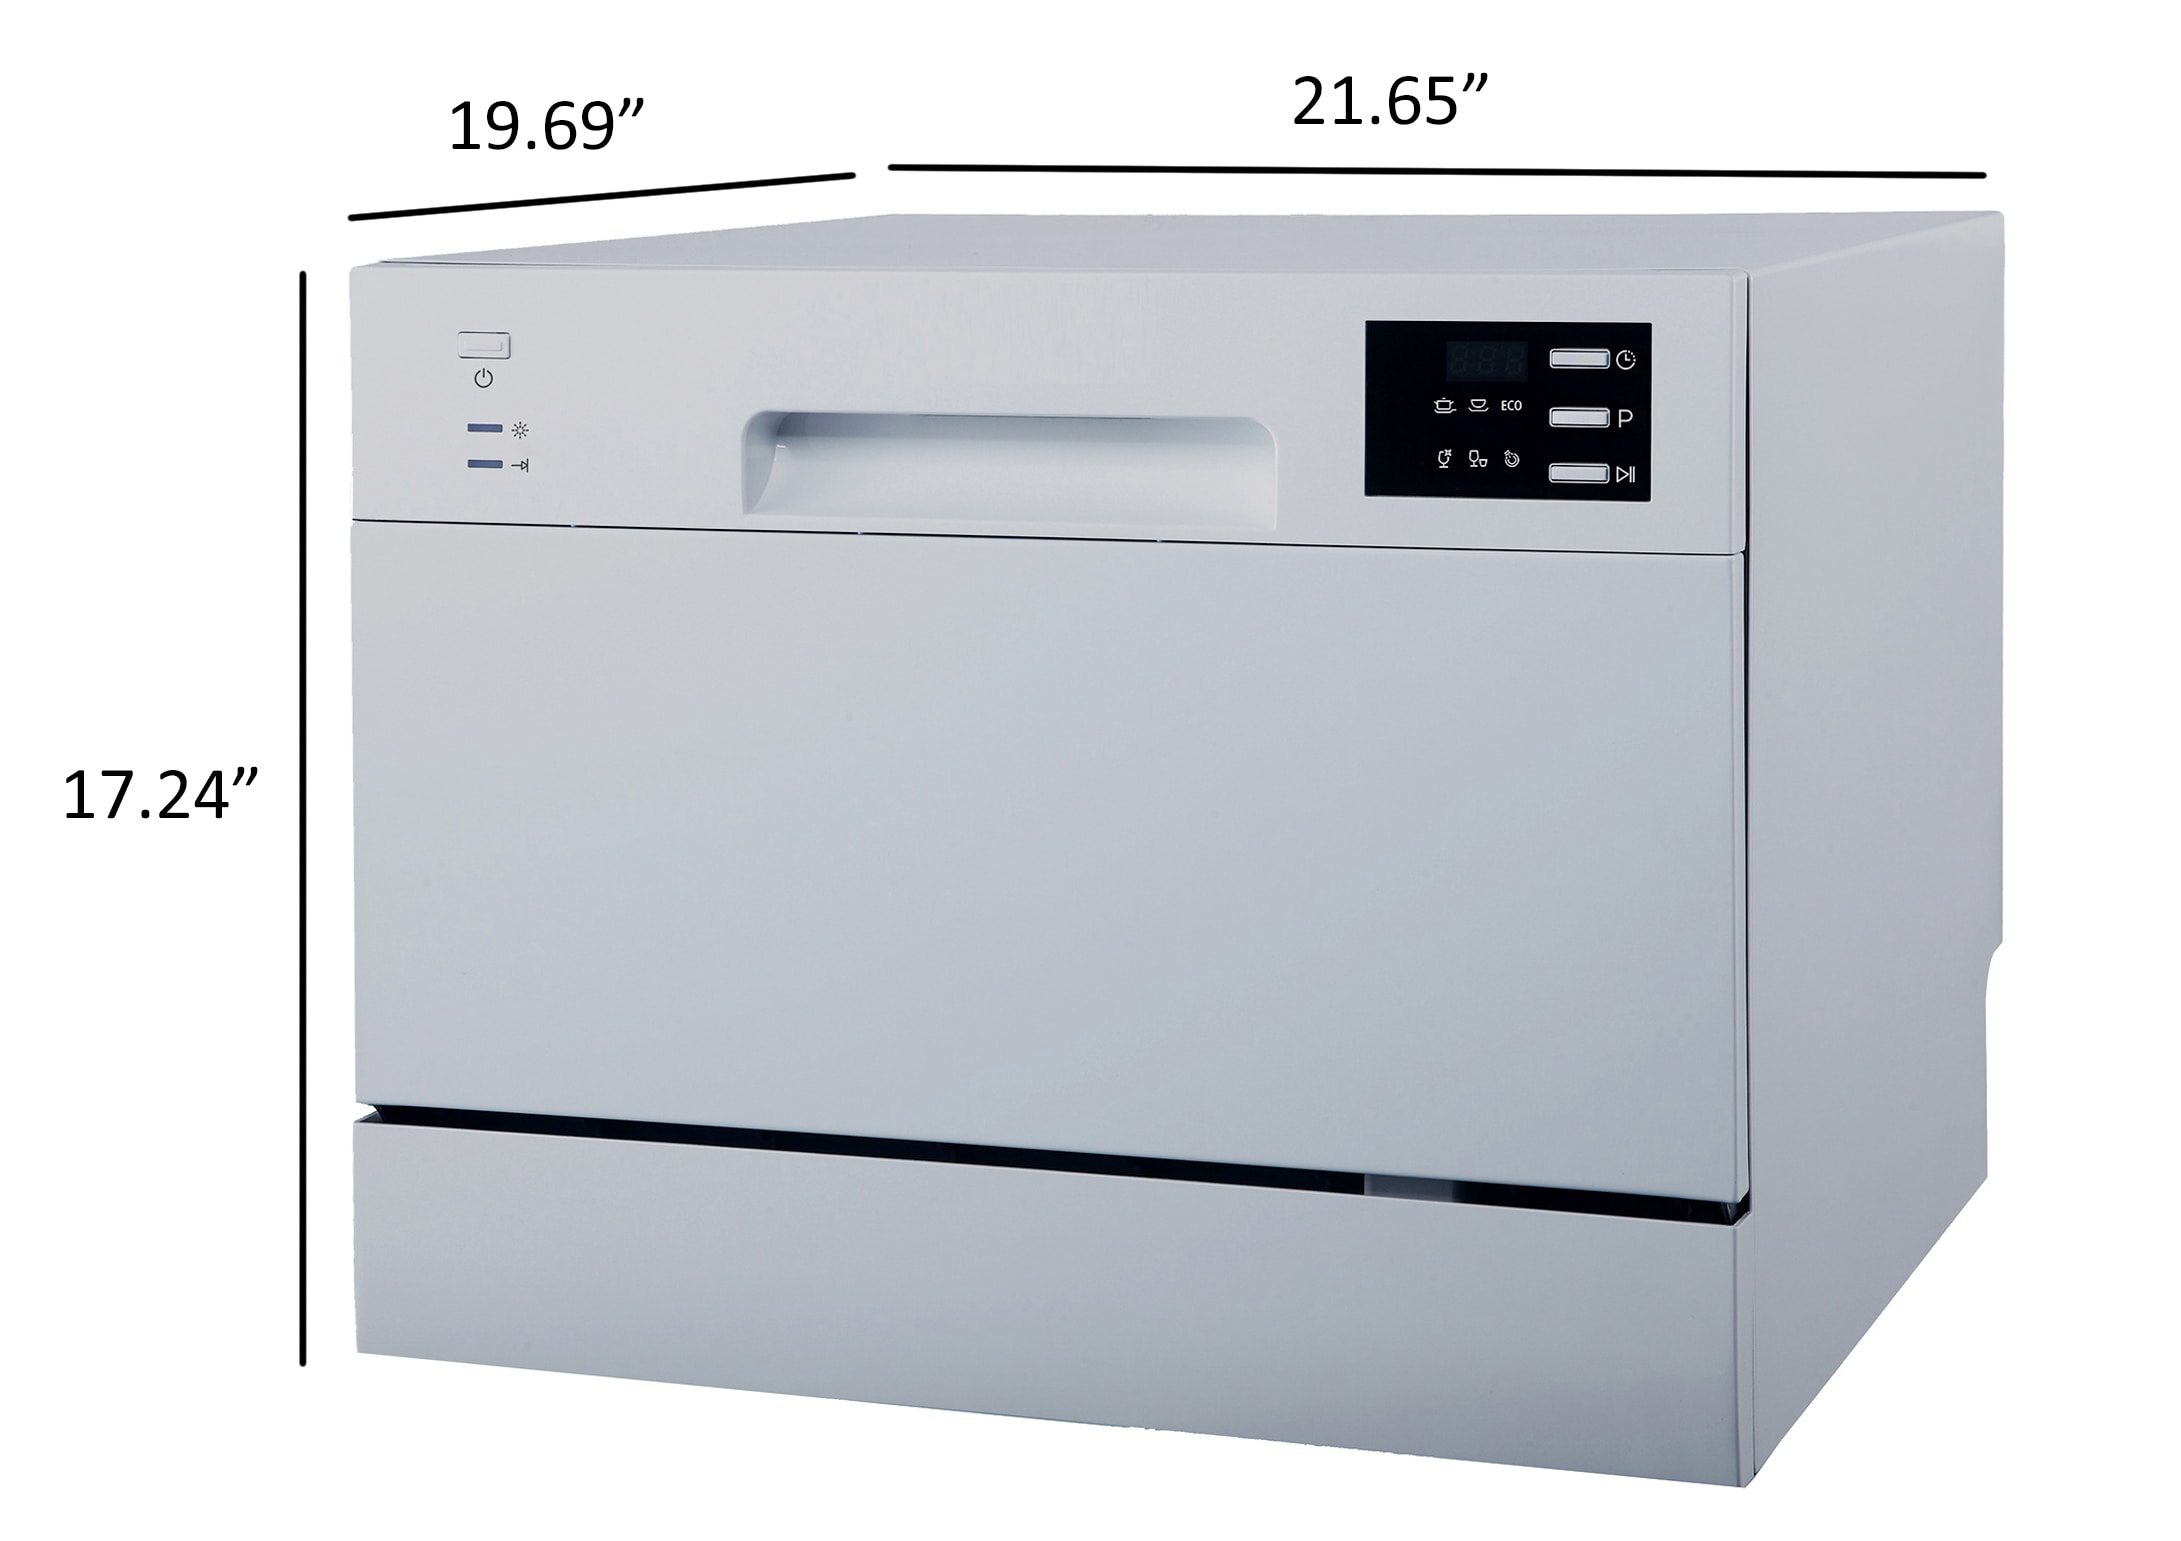 Honeywell 22 in. Countertop Dishwasher with 6 Place Settings, 6 Washing Programs, Stainless Steel Tub, UL/Energy Star, White